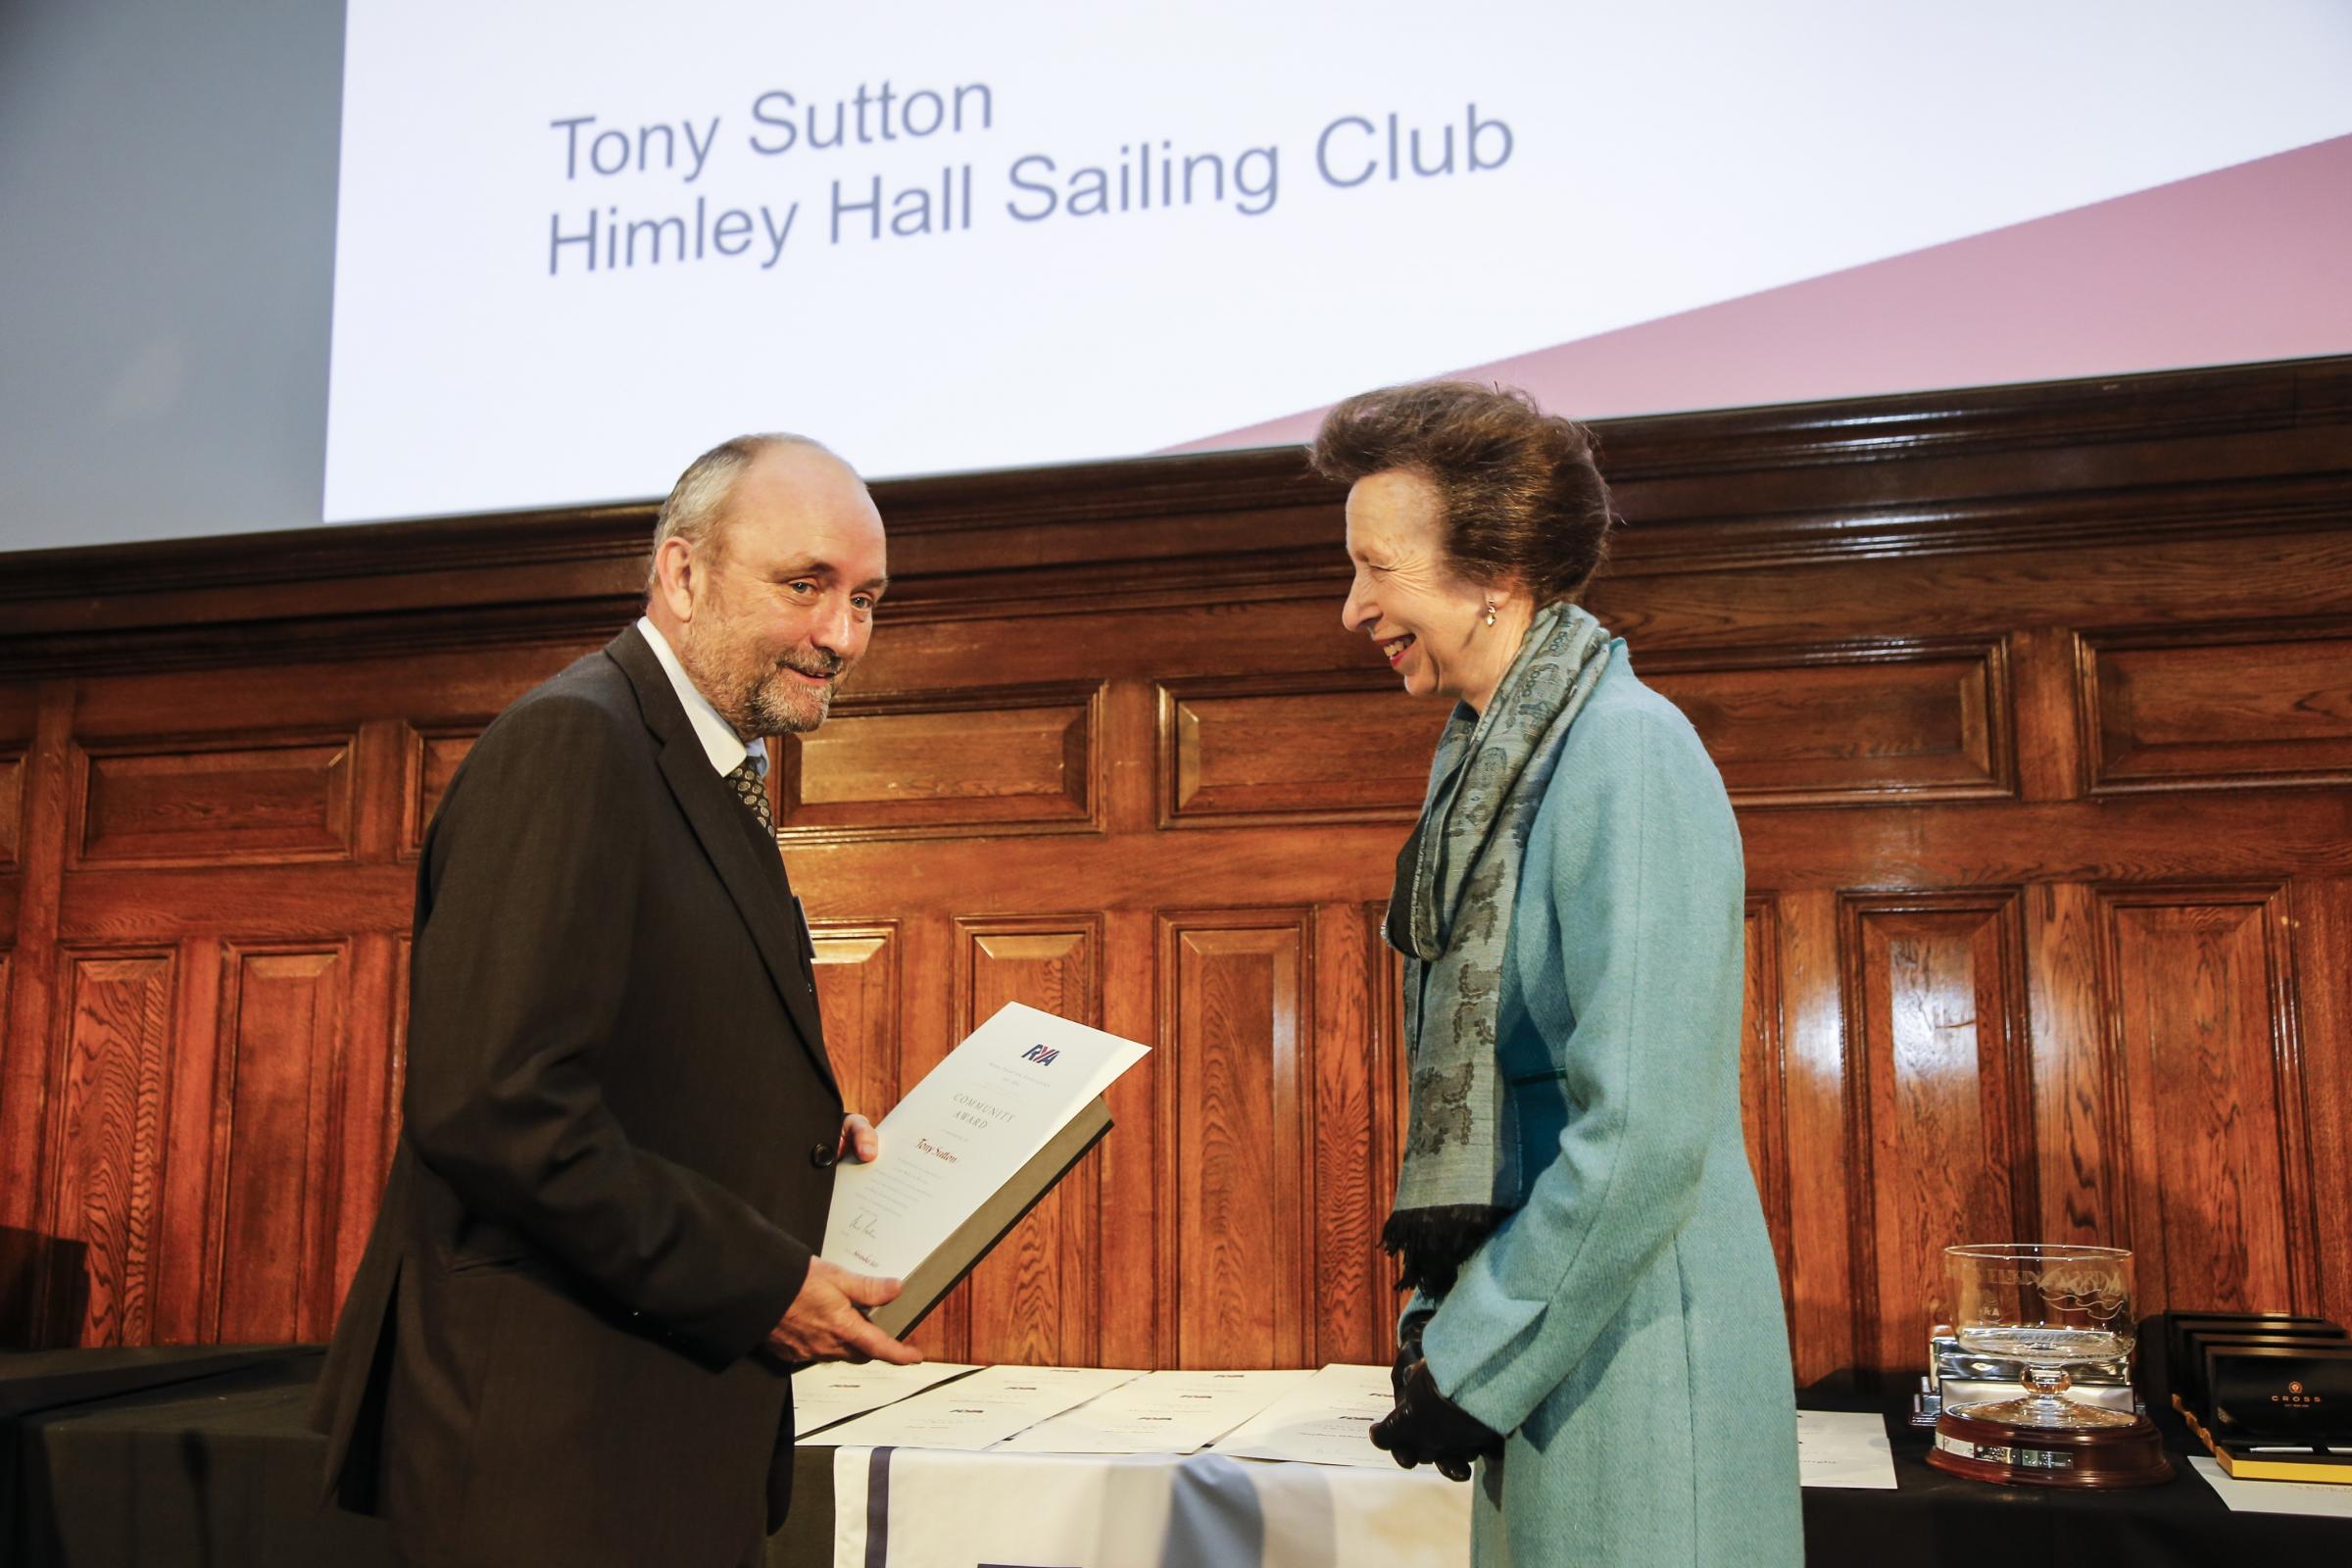 Tony Sutton receives his RYA Volunteer Award from HRH The Princess Royal, Pic by Paul Wyeth